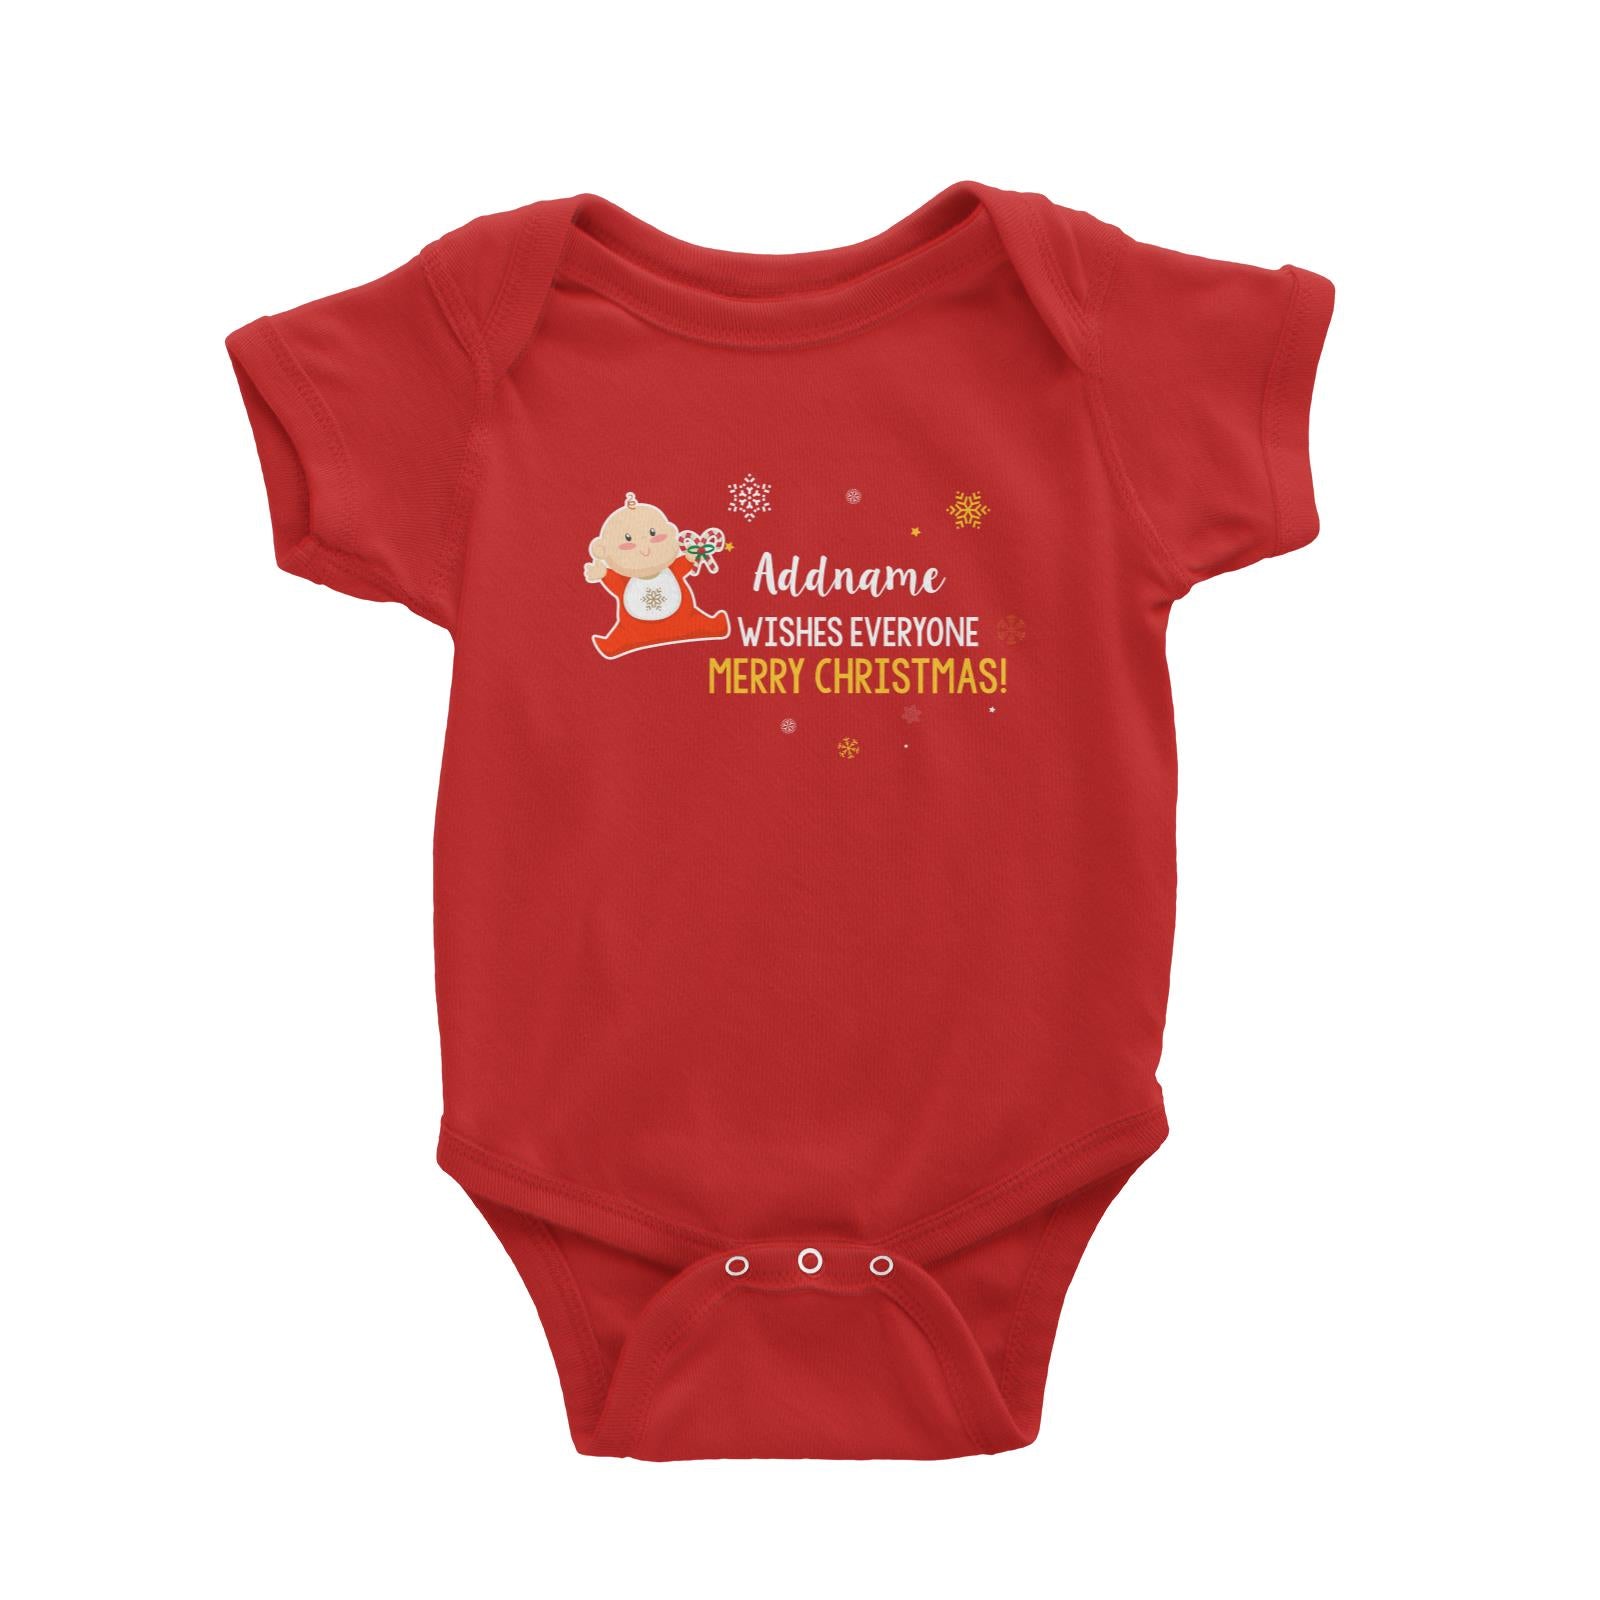 Cute Elf Baby Wishes Everyone Merry Christmas Addname Baby Romper  Matching Family Personalizable Designs